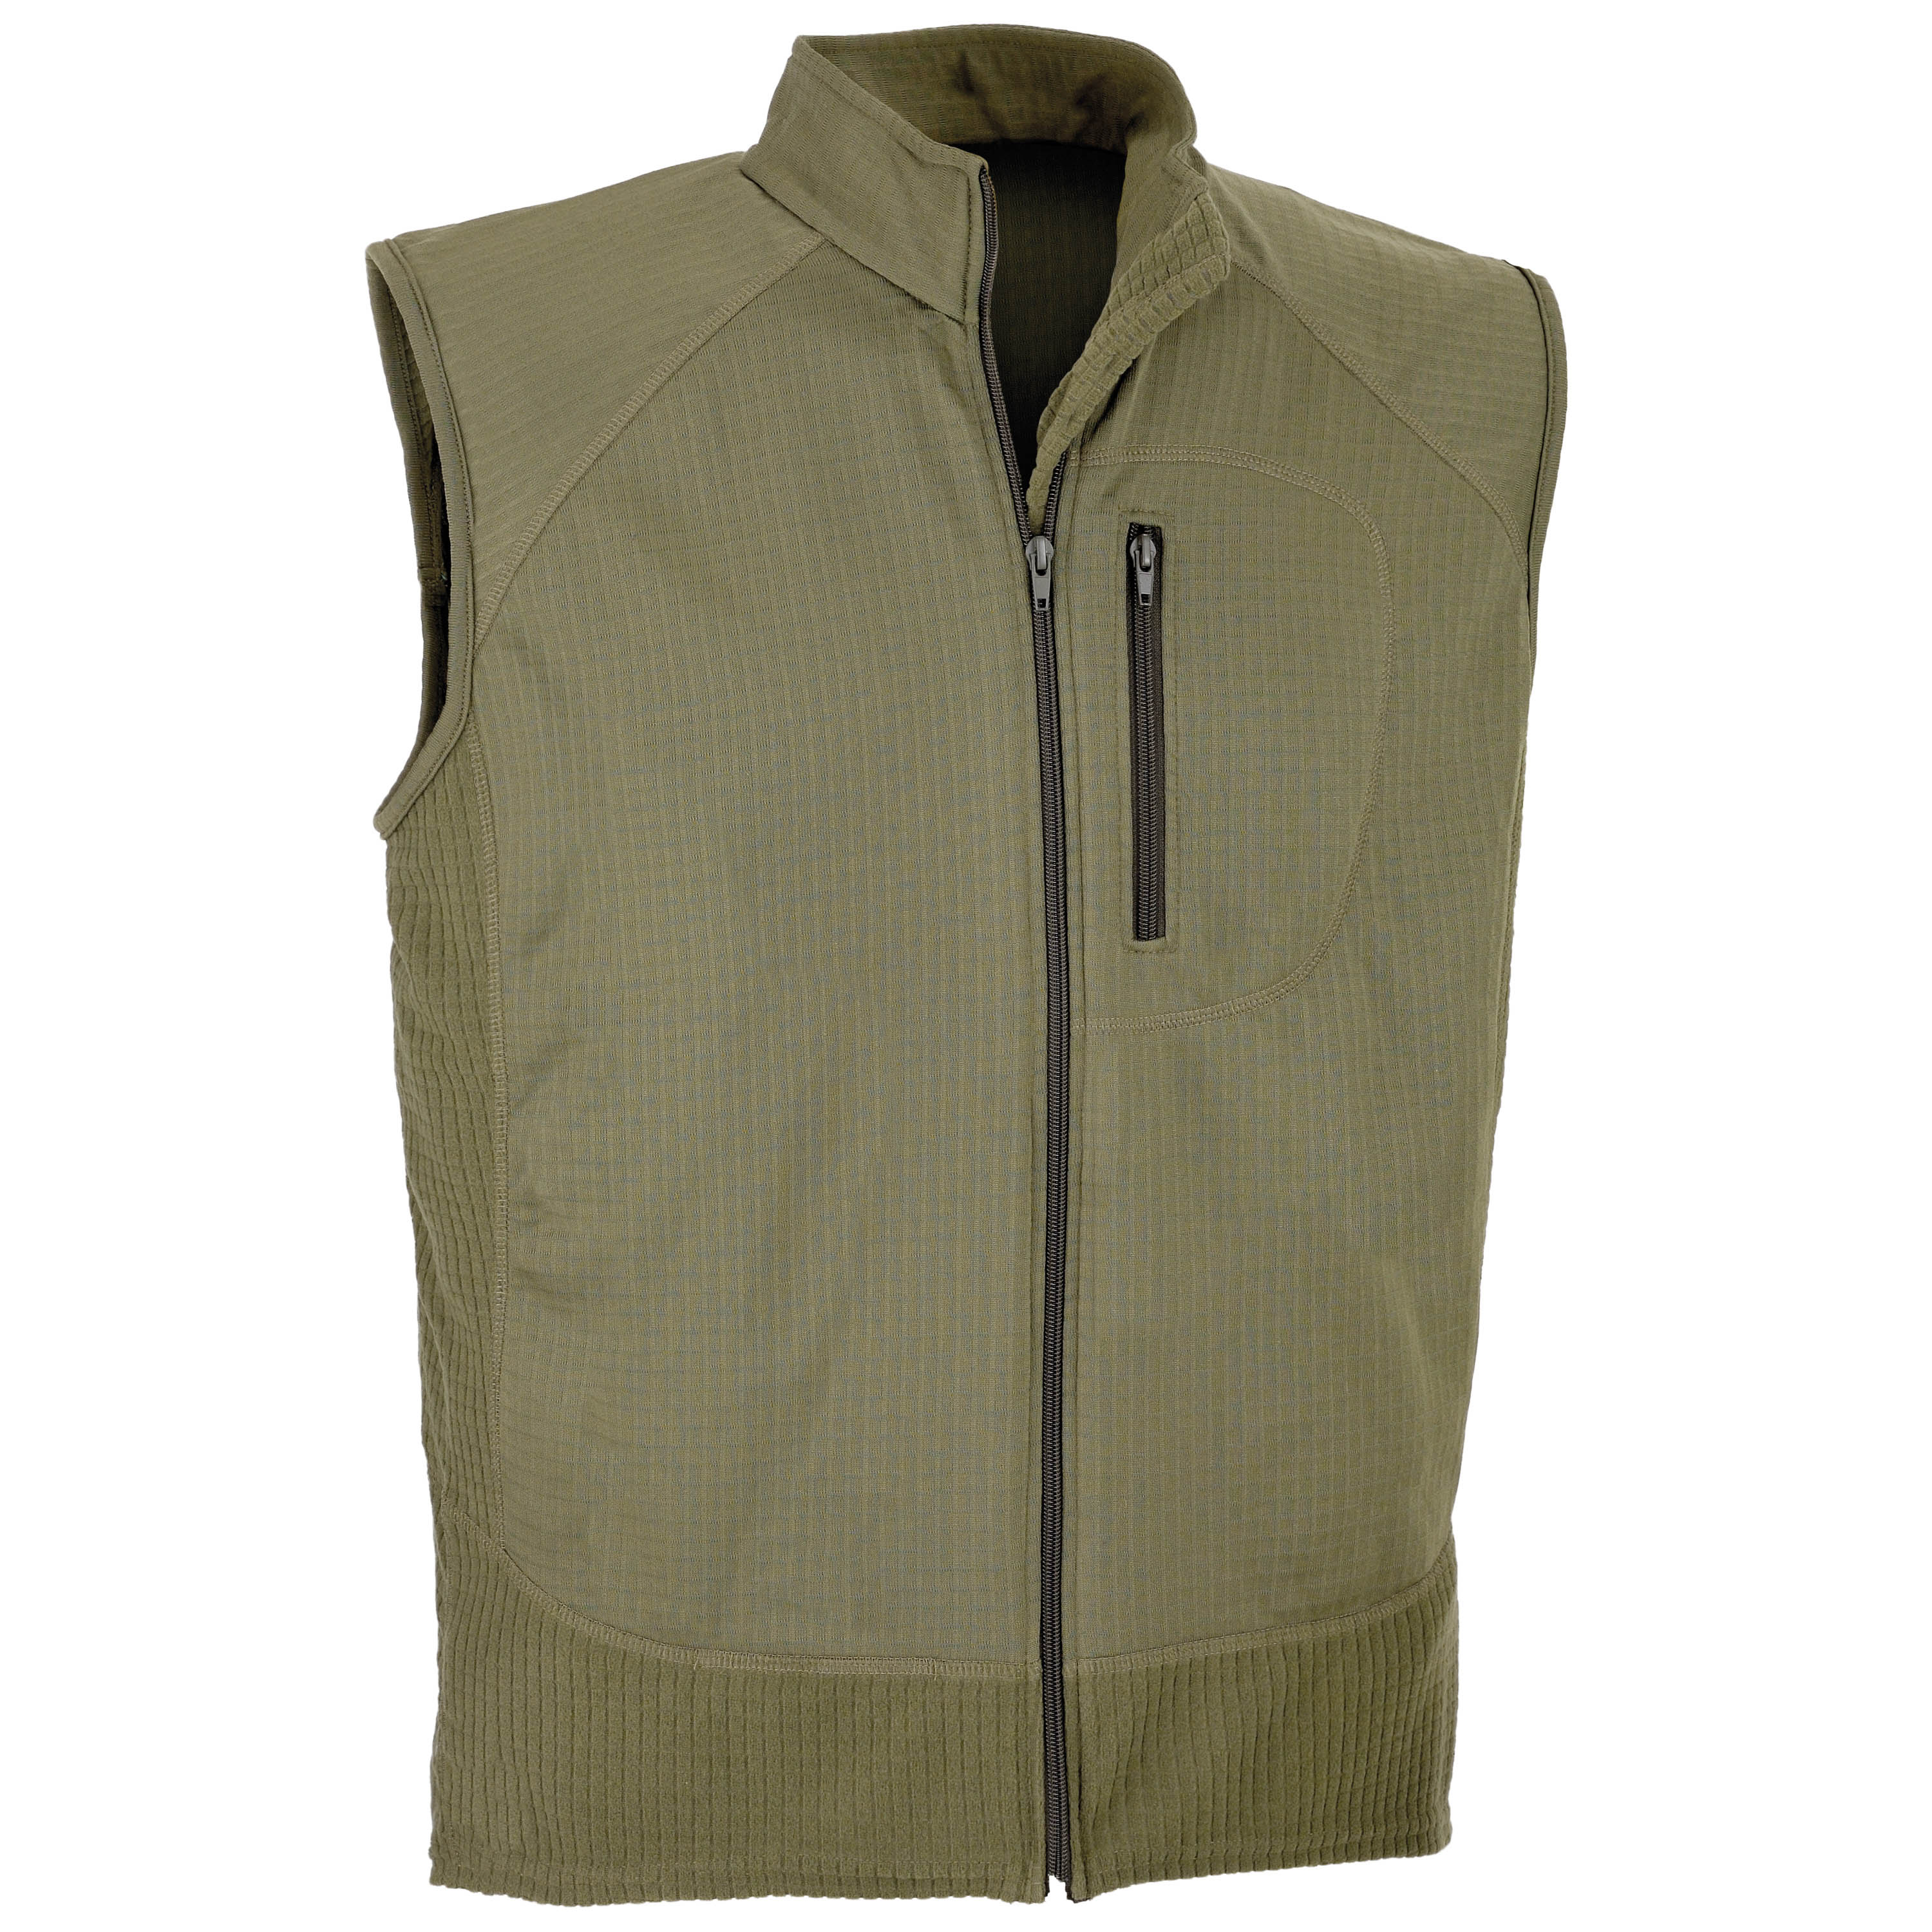 Purchase the Defcon 5 Combat Fleece Vest Tactical olive by ASMC